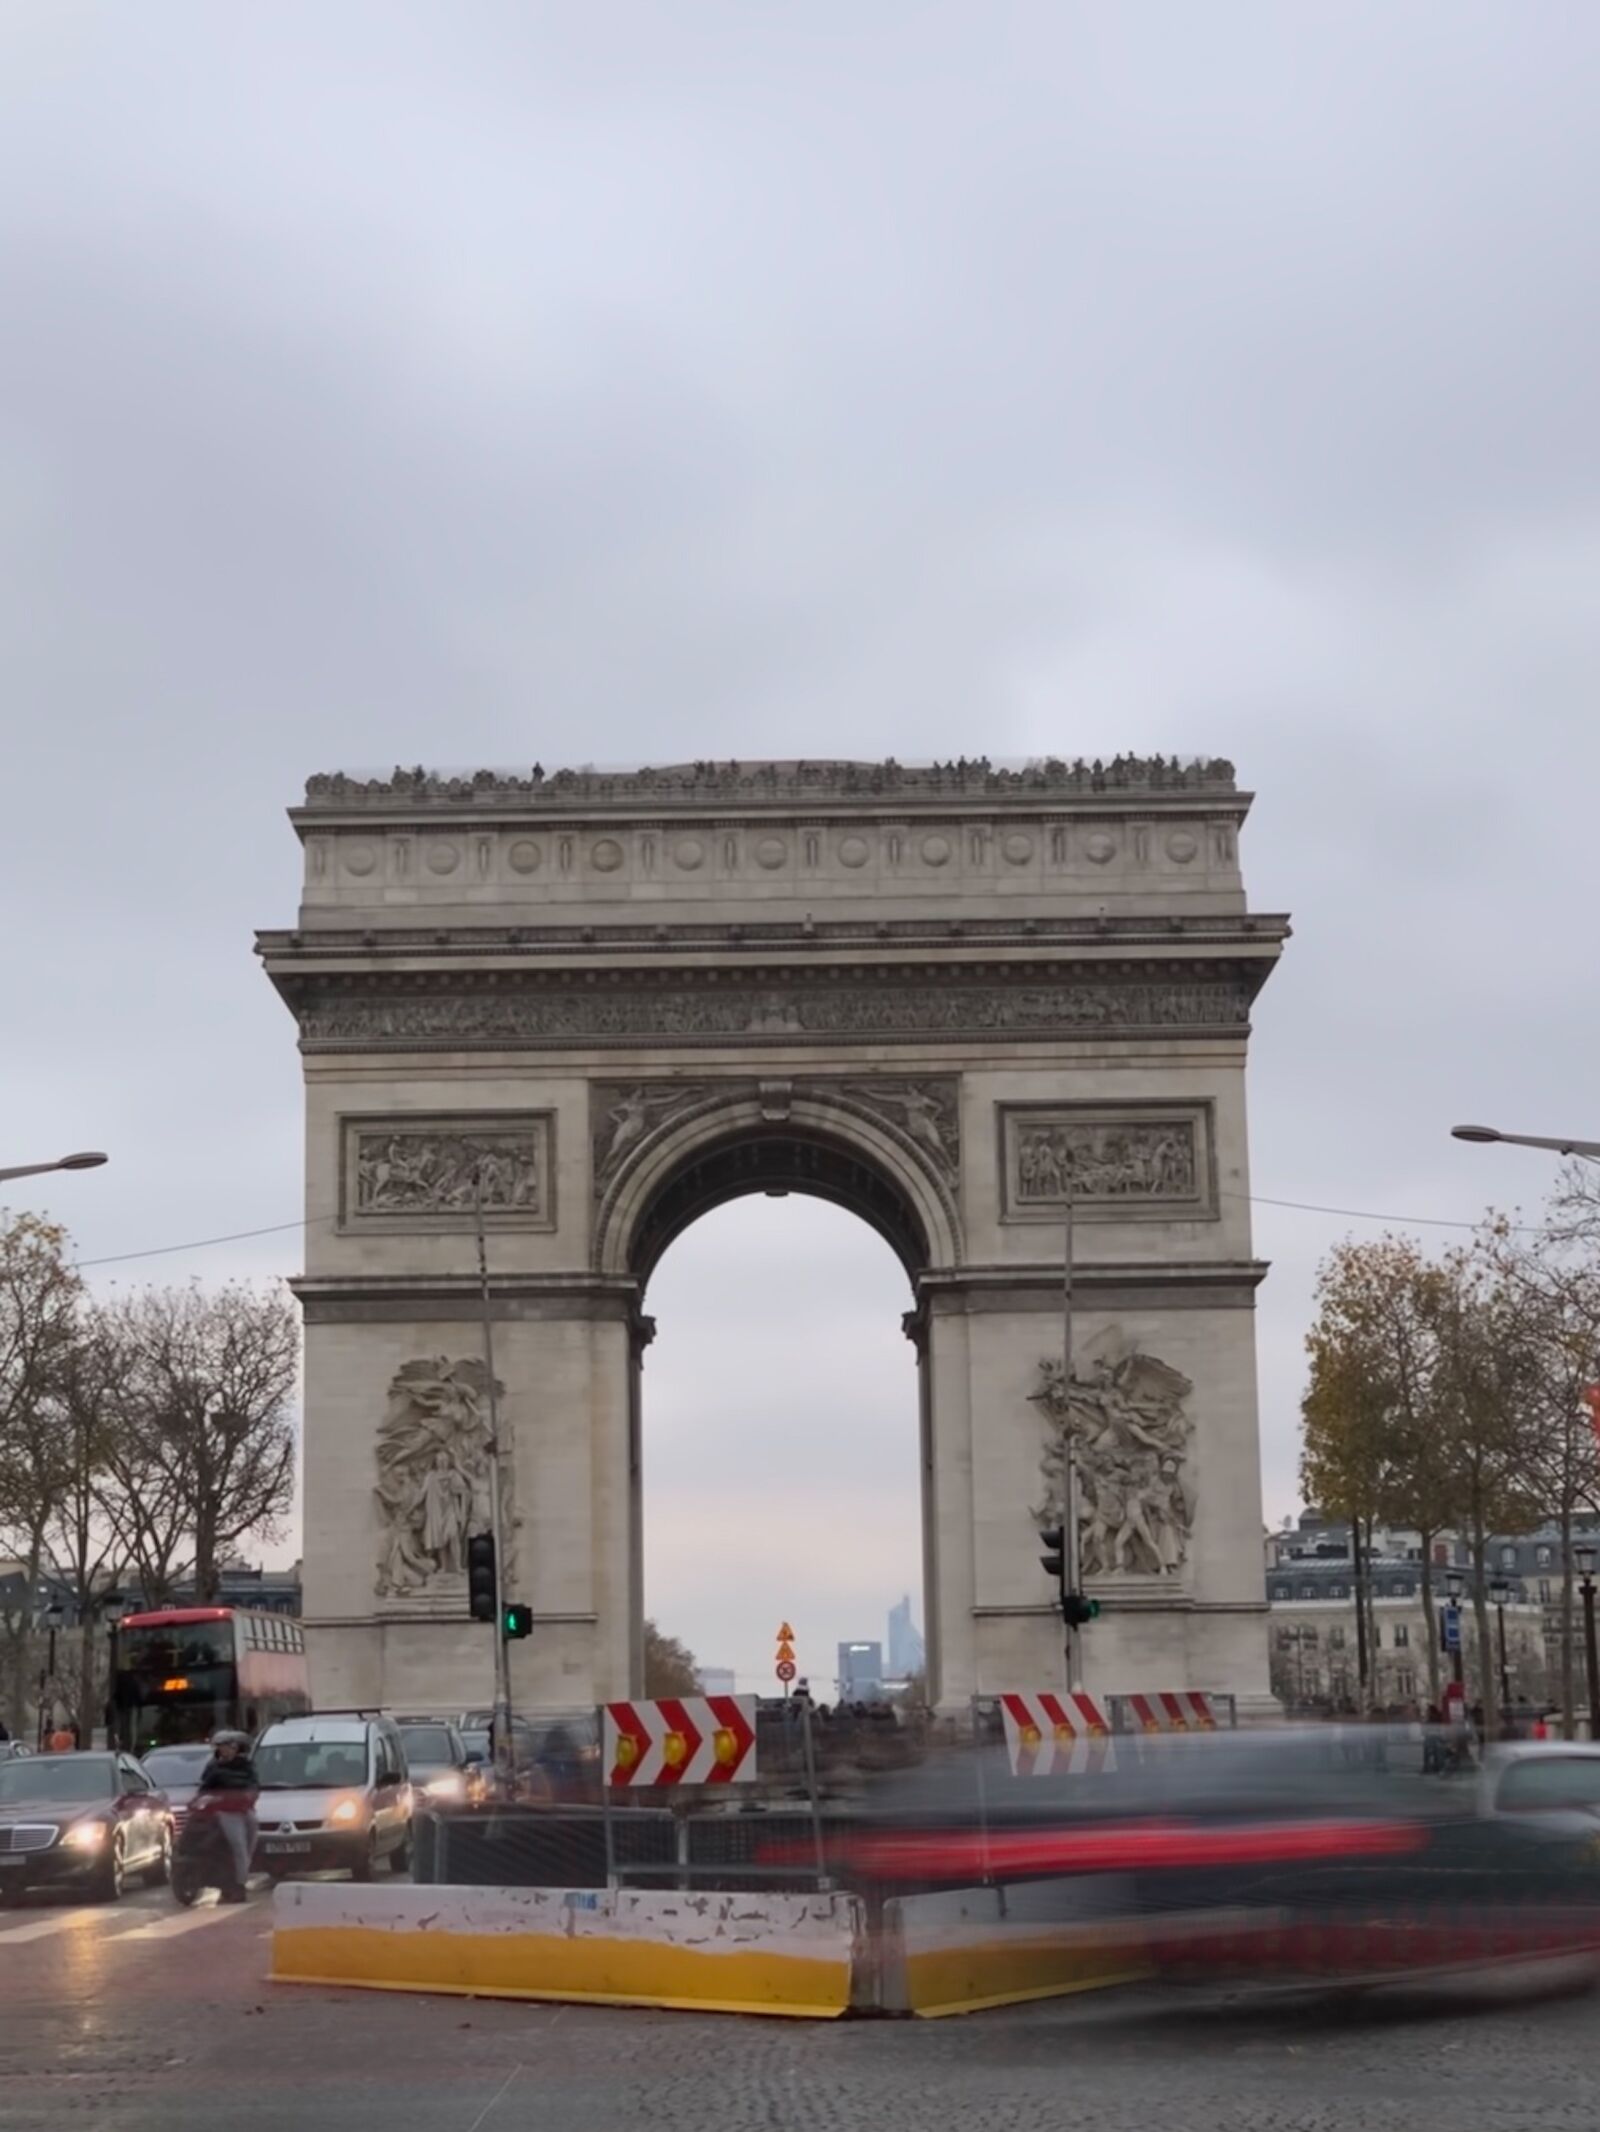 iPhone XS back dual camera 6mm f/2.4 sample photo. Arc de triomphe, architecture photography